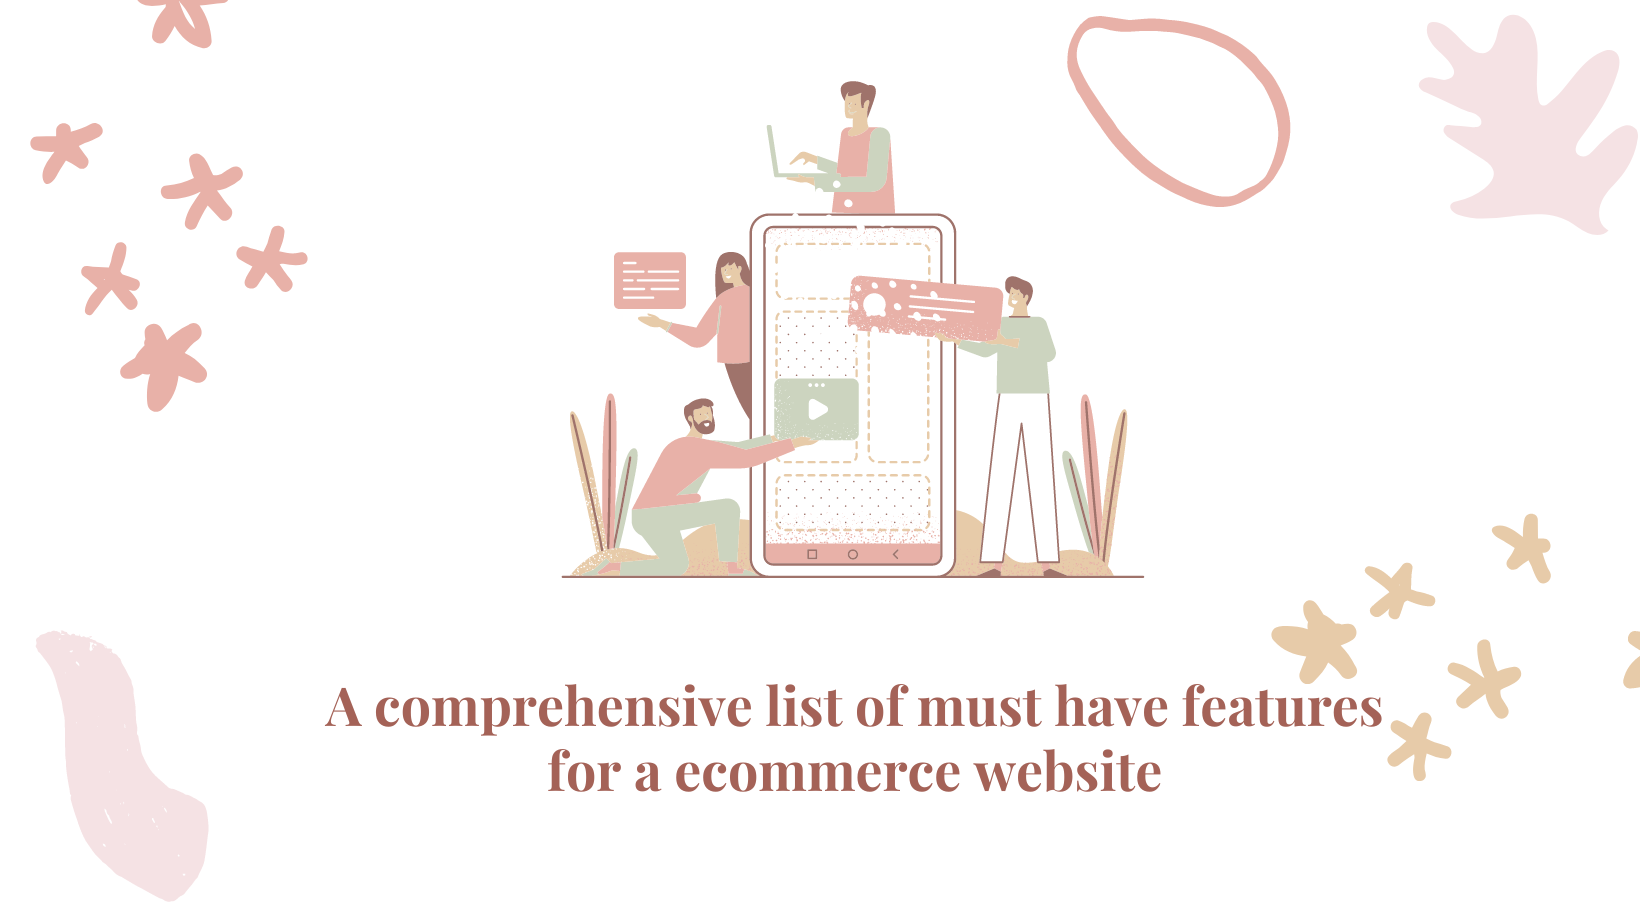 A comprehensive list of must have features for a ecommerce website